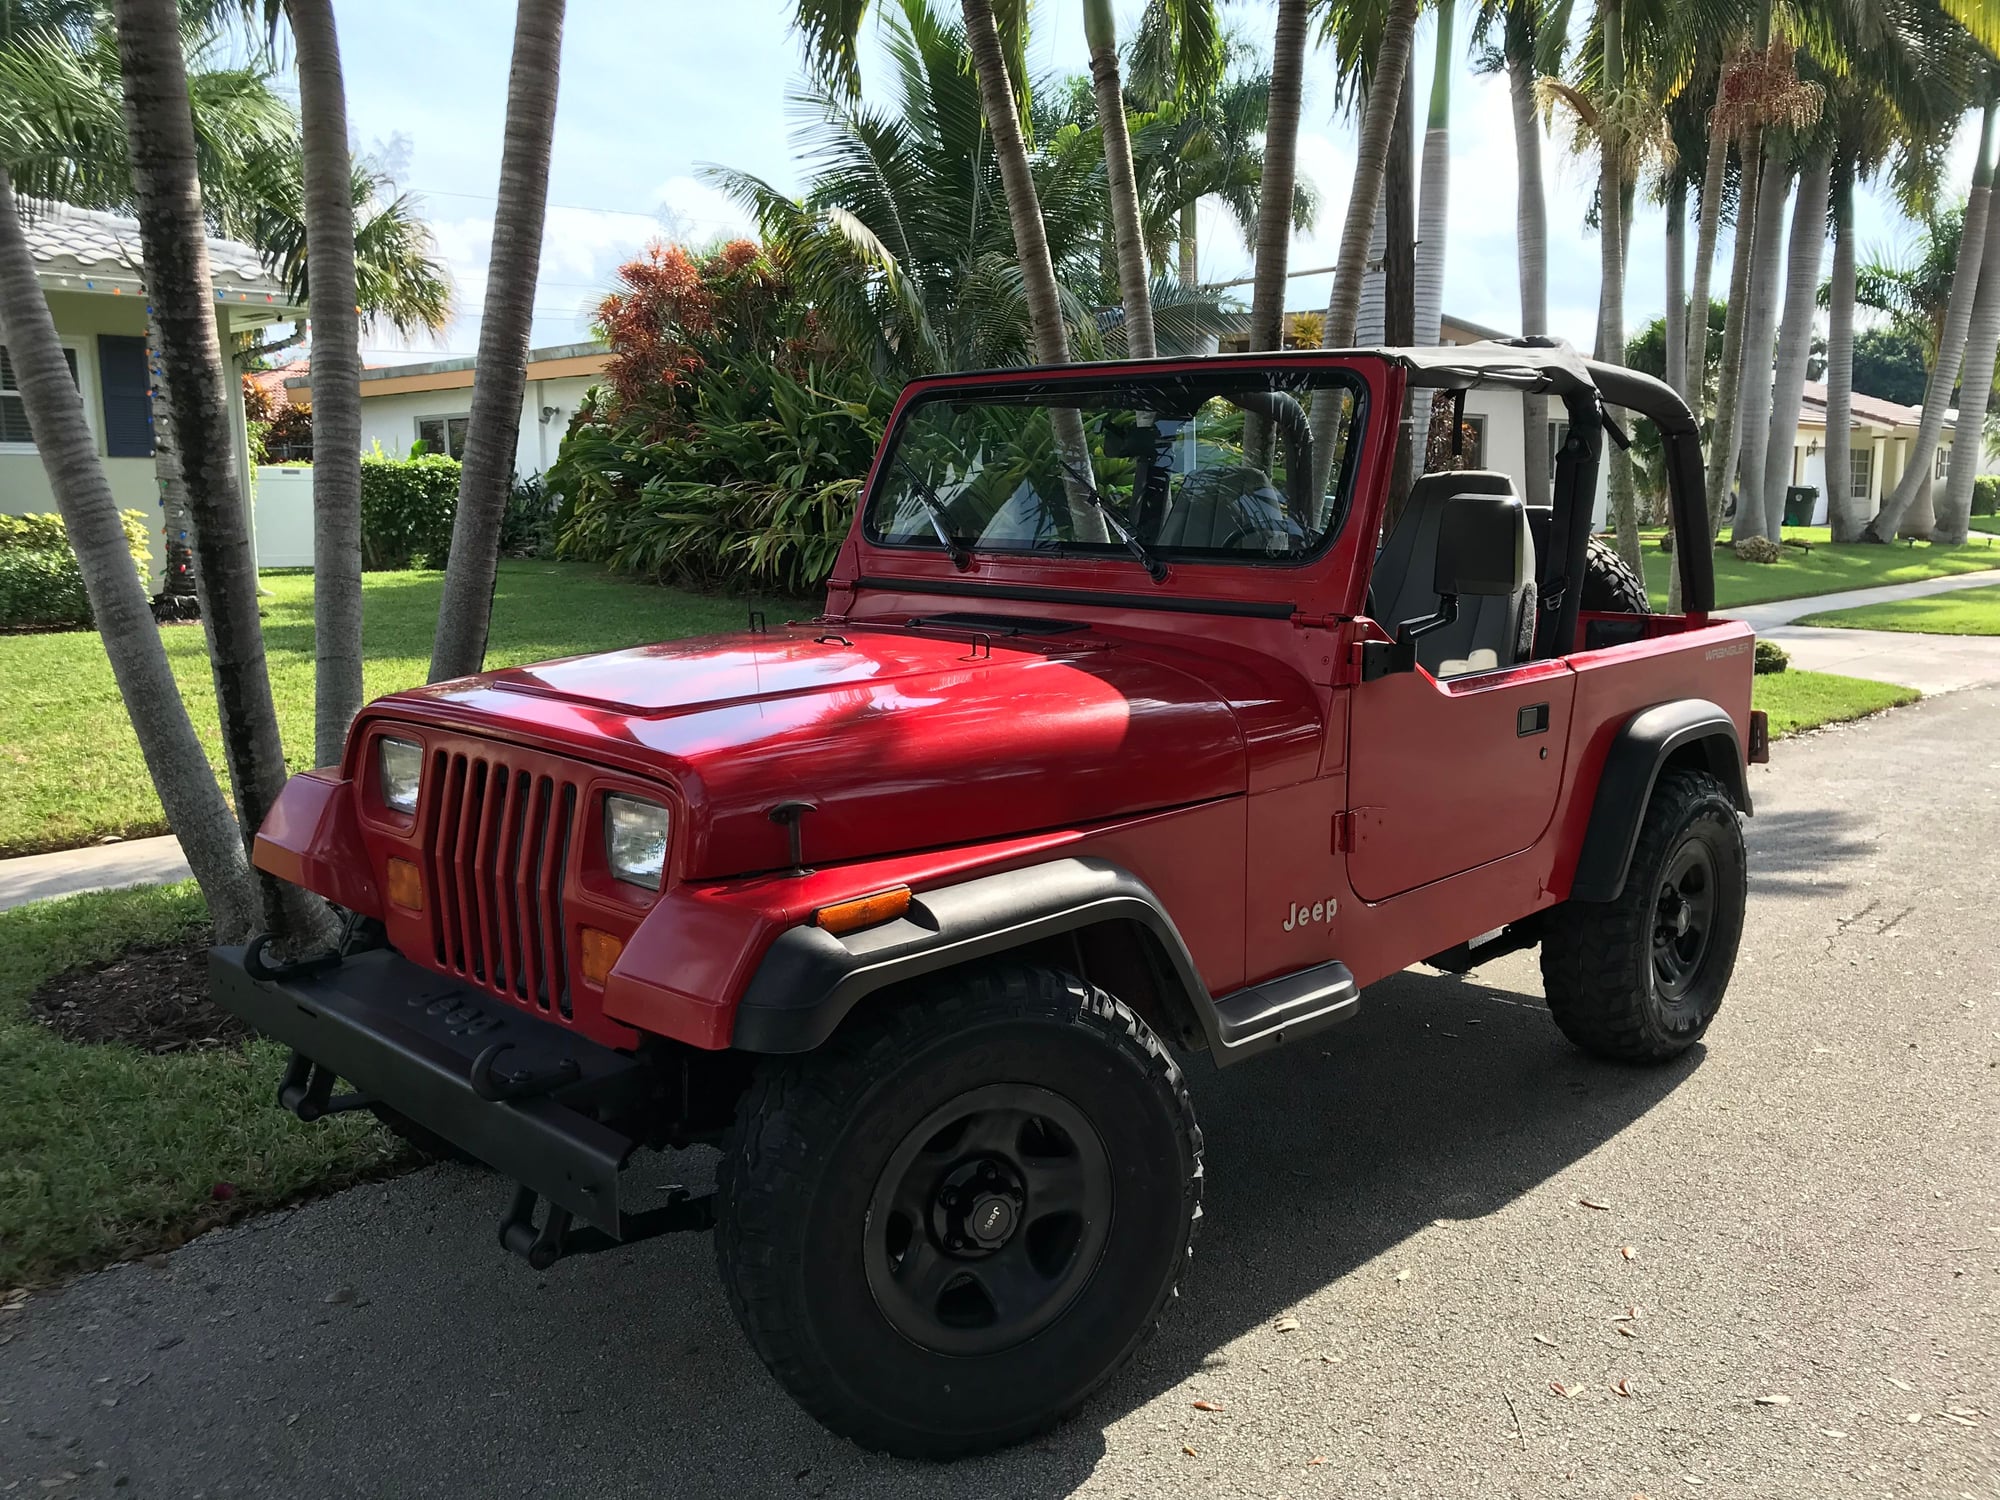 HUGE PRICE DROP! 1995 Jeep Wrangler YJ  I6. $3500 - The Hull Truth -  Boating and Fishing Forum